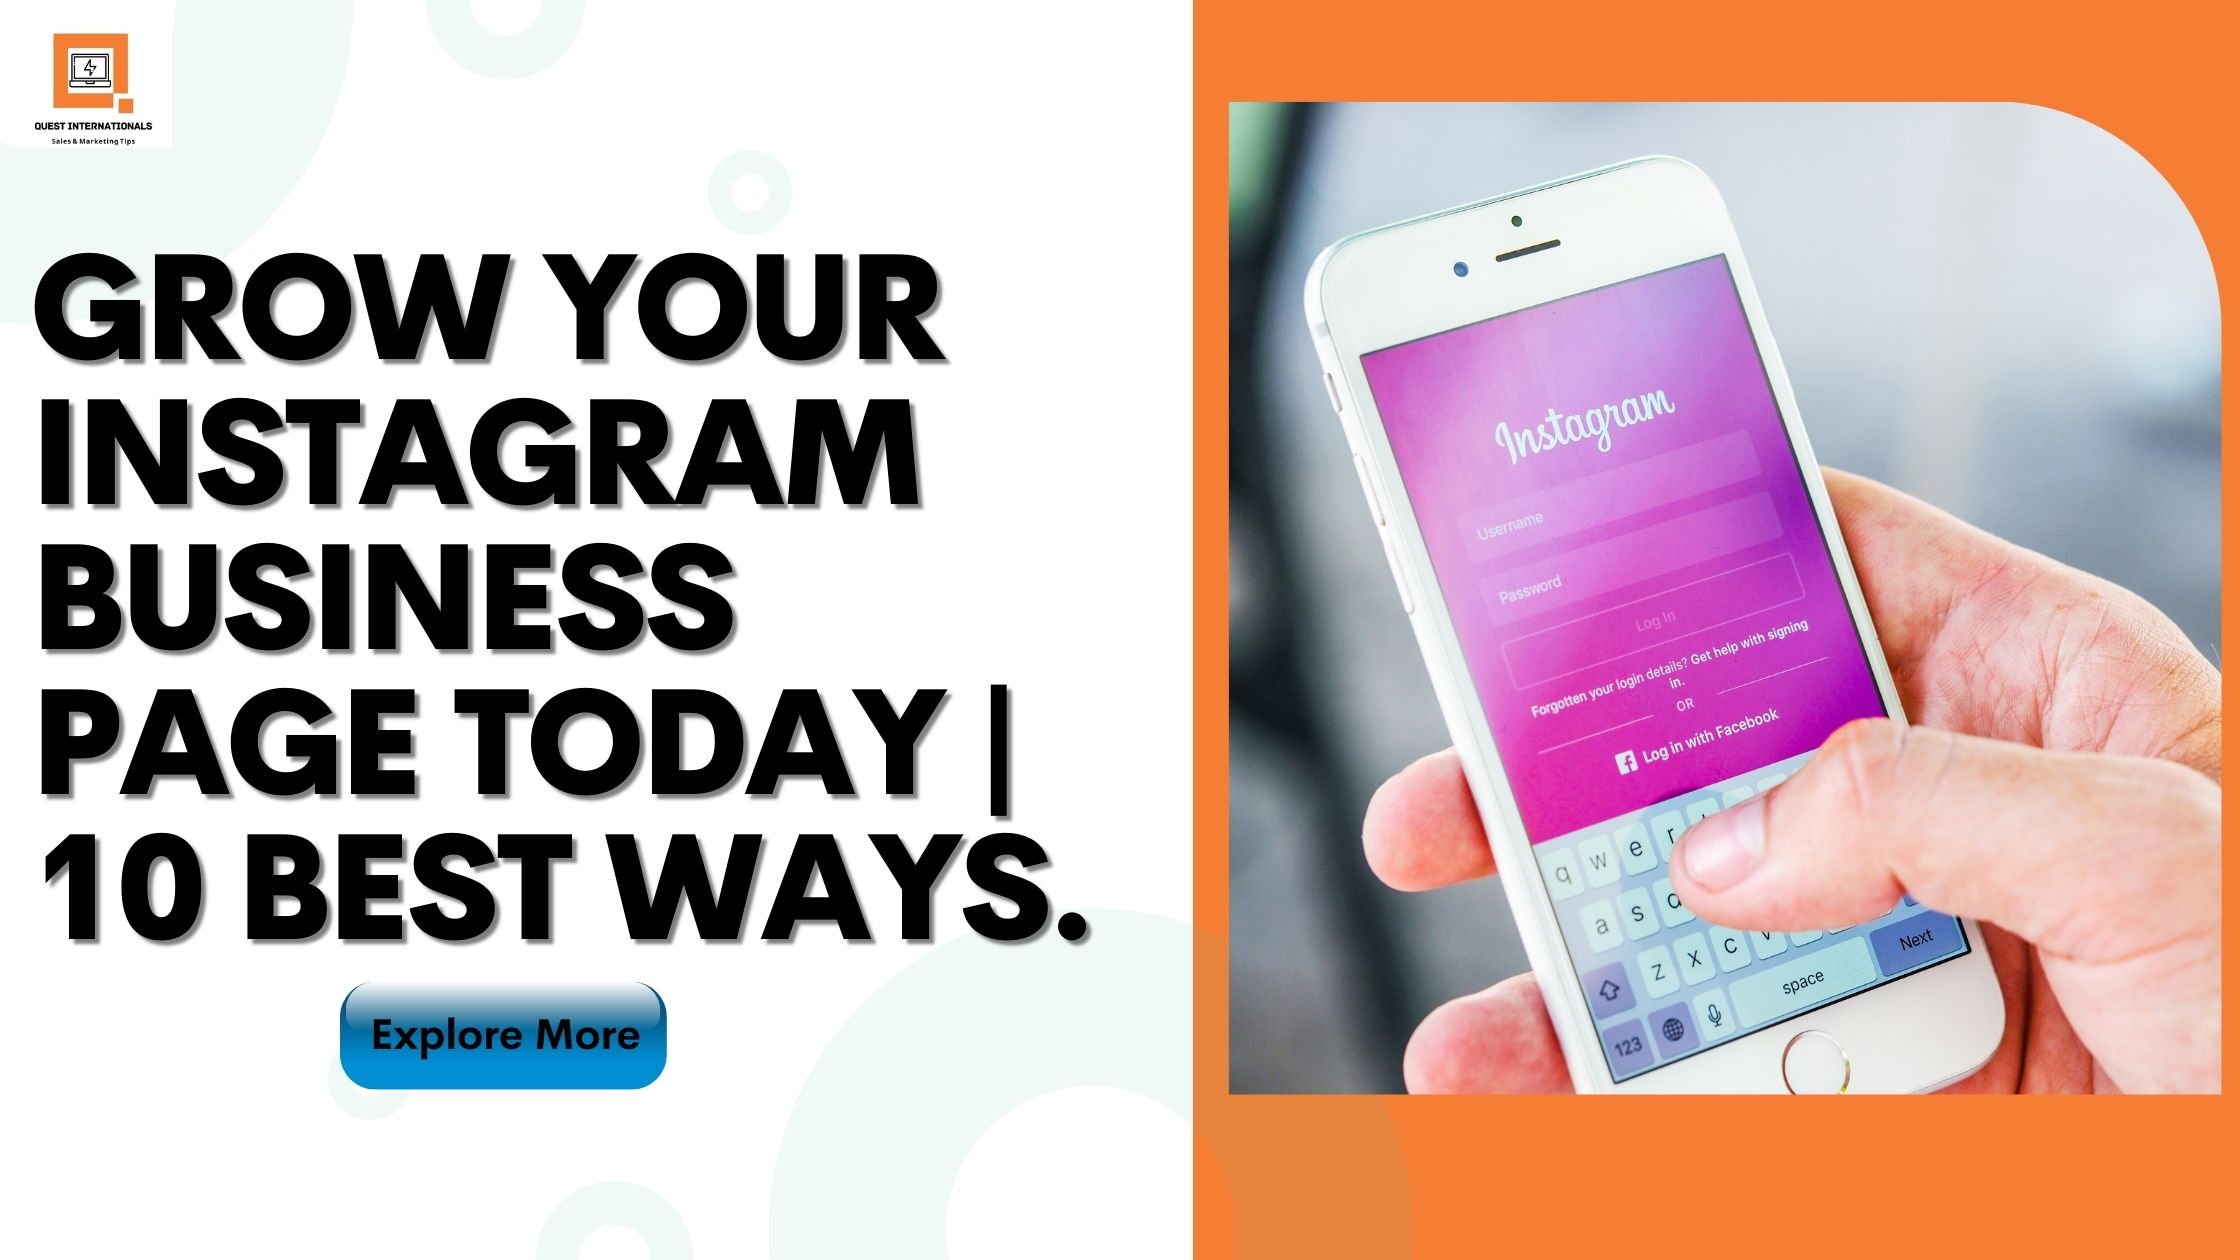 You are currently viewing Grow Your Instagram Business Page Today | 10 Best Ways.